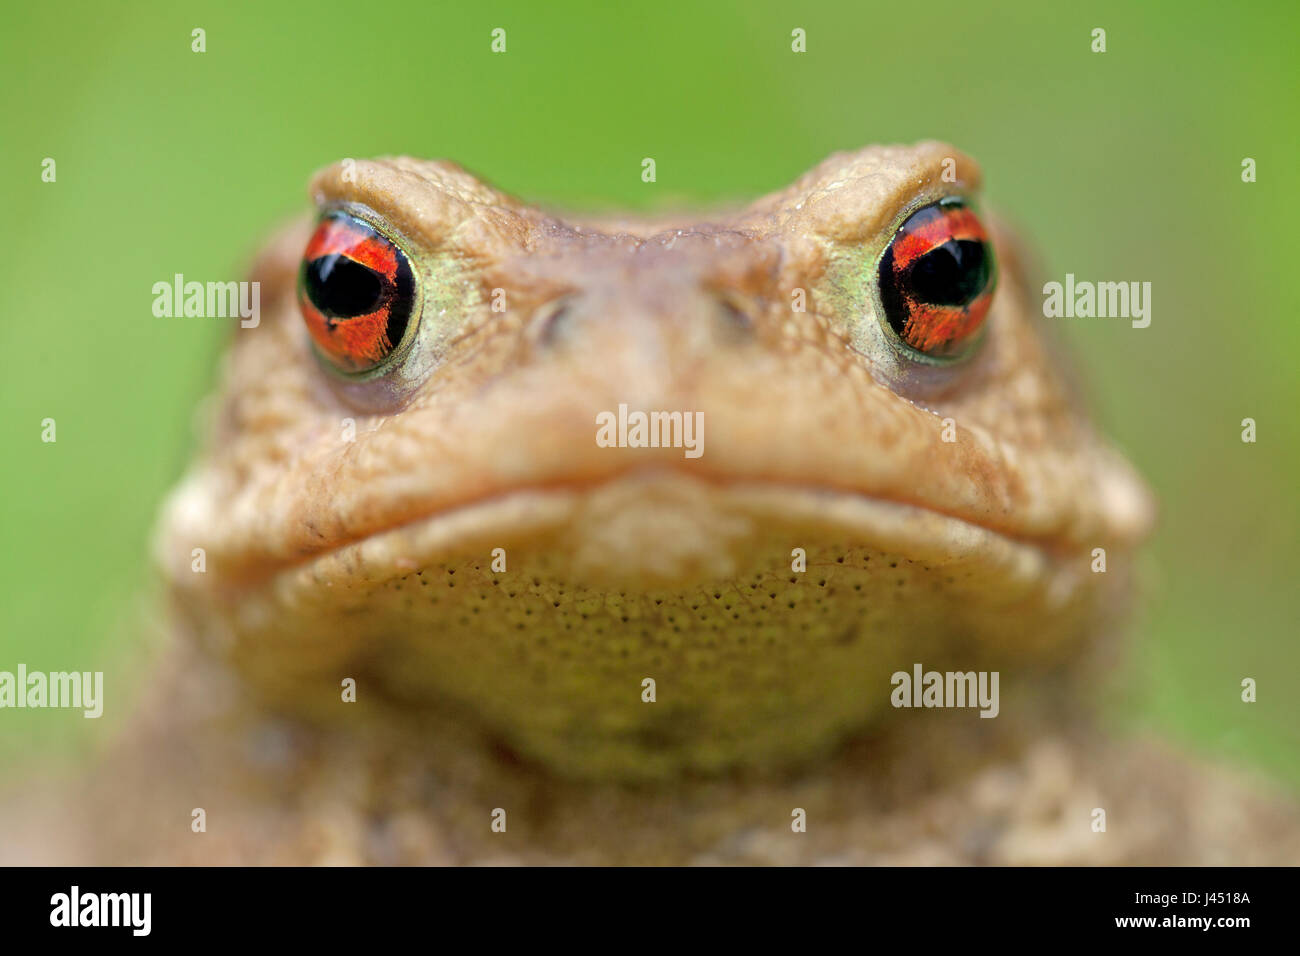 Frontal portrait of a spiny toad Stock Photo